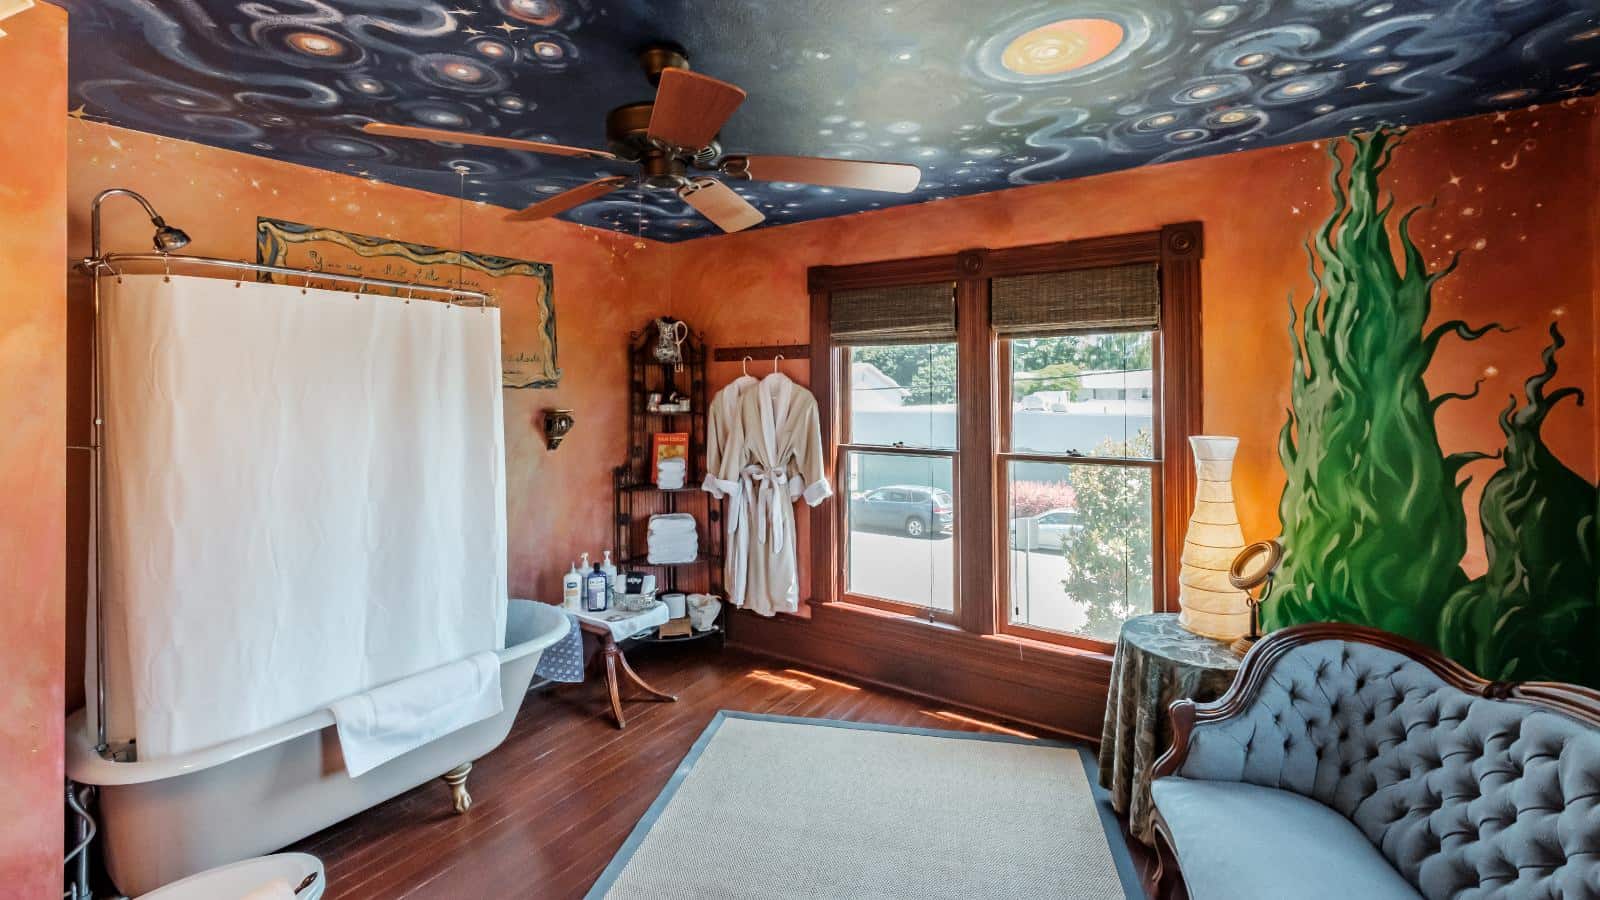 Bedroom with custom scenes painted on the walls and ceiling, hardwood flooring, claw-foot tub with shower, and antique wooden and blue upholstered love seat